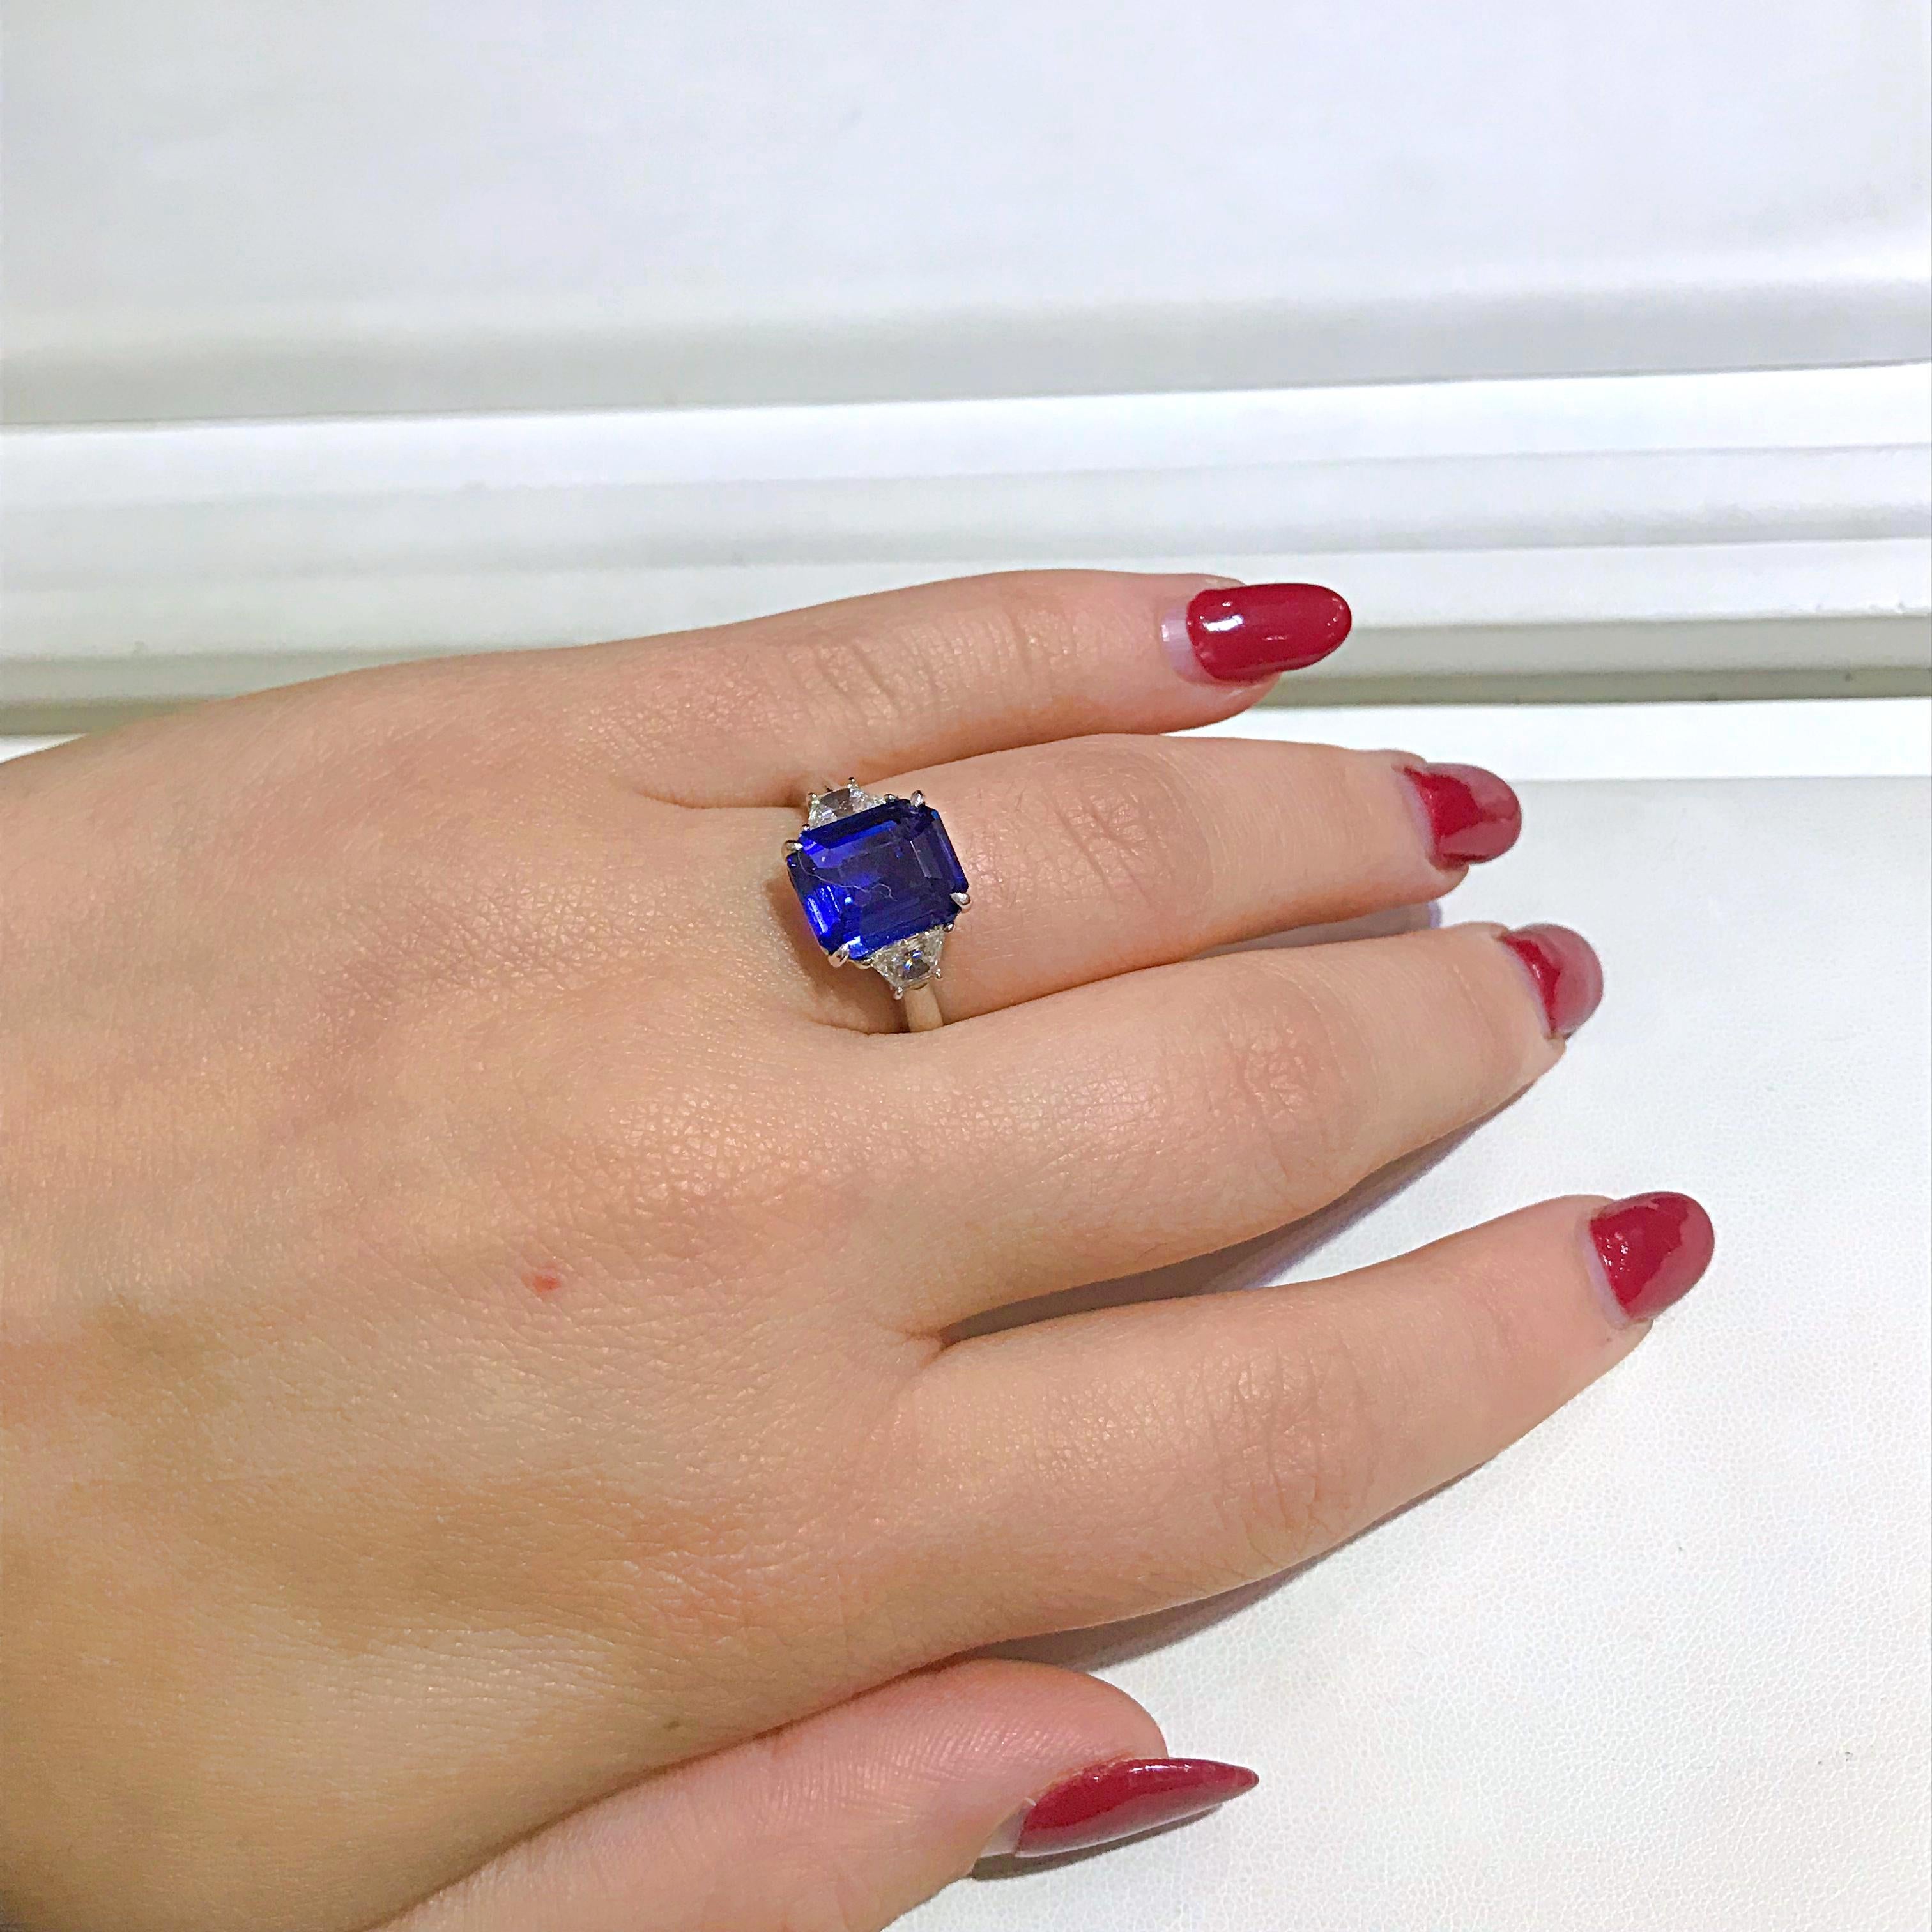 This classic style ring is a beautiful and elegant way to display a 5.11 carat Sapphire. The two trapezoid cut diamonds are a sparkling addition and total .52 carats total weight. The ring is crafted from platinum and is currently a size 8.5. This